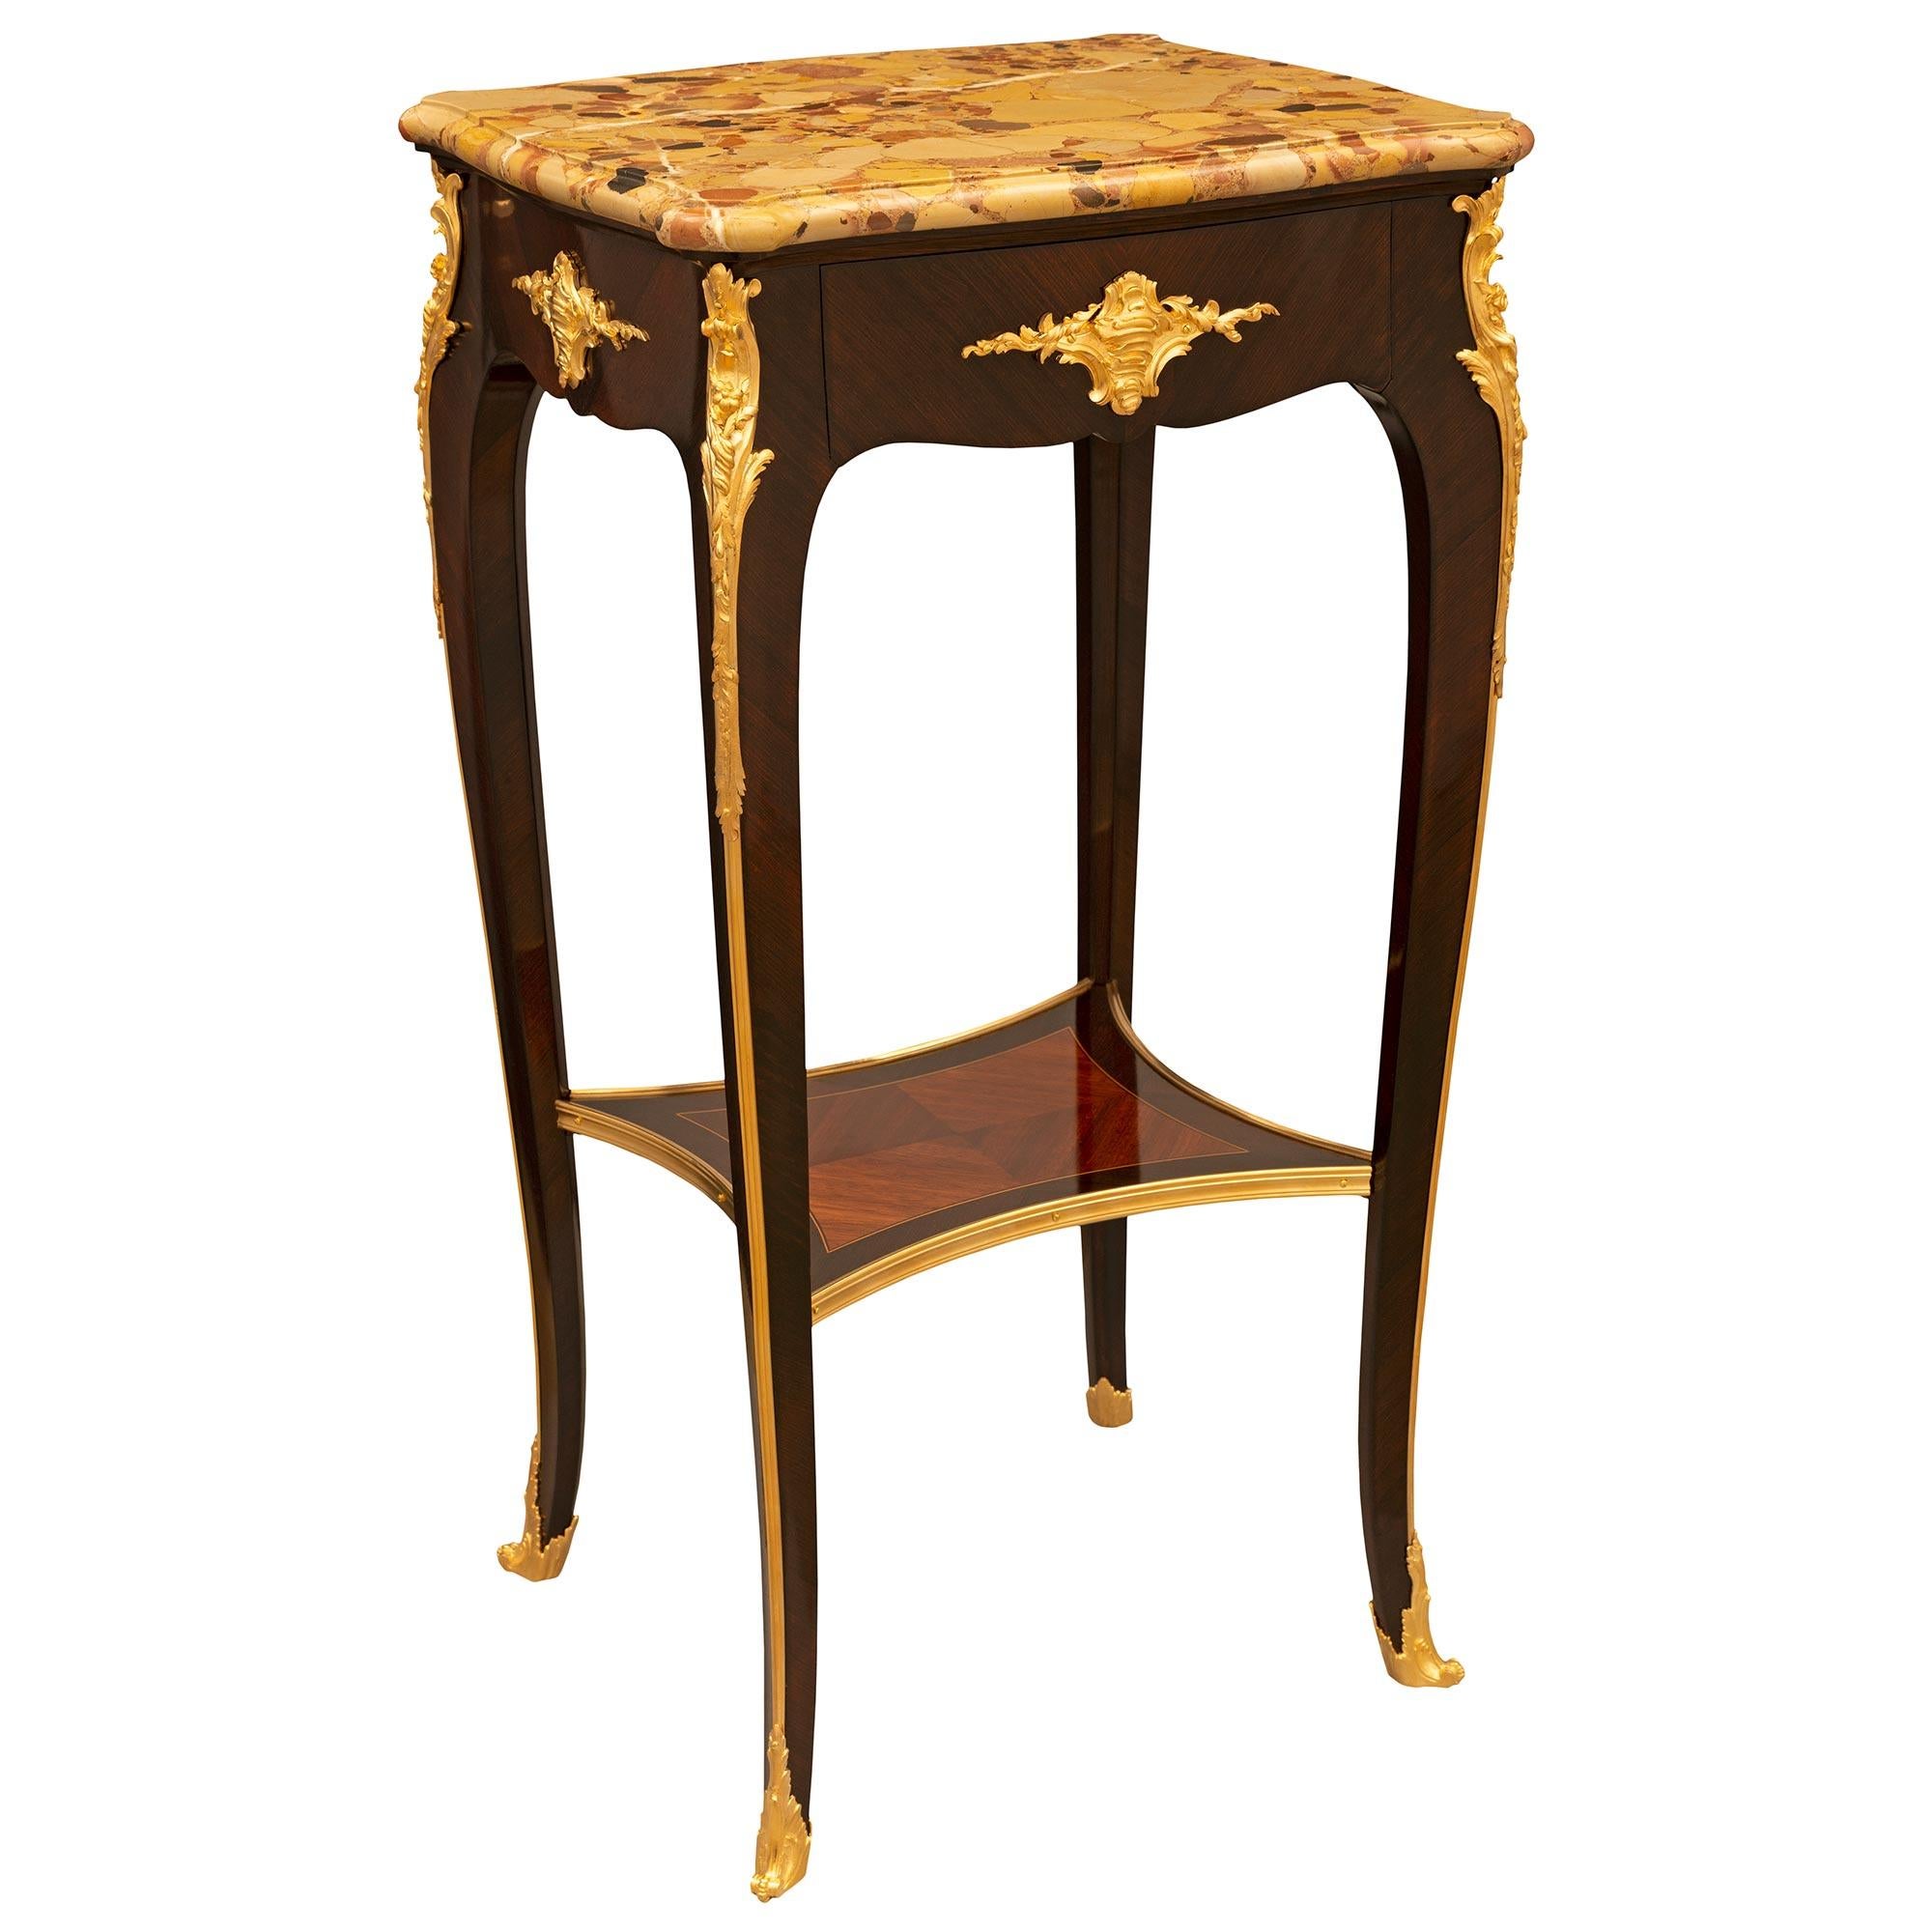 French 19th Century Louis XV St. Kingwood, Ormolu and Brèche D'alep Side Table In Good Condition For Sale In West Palm Beach, FL